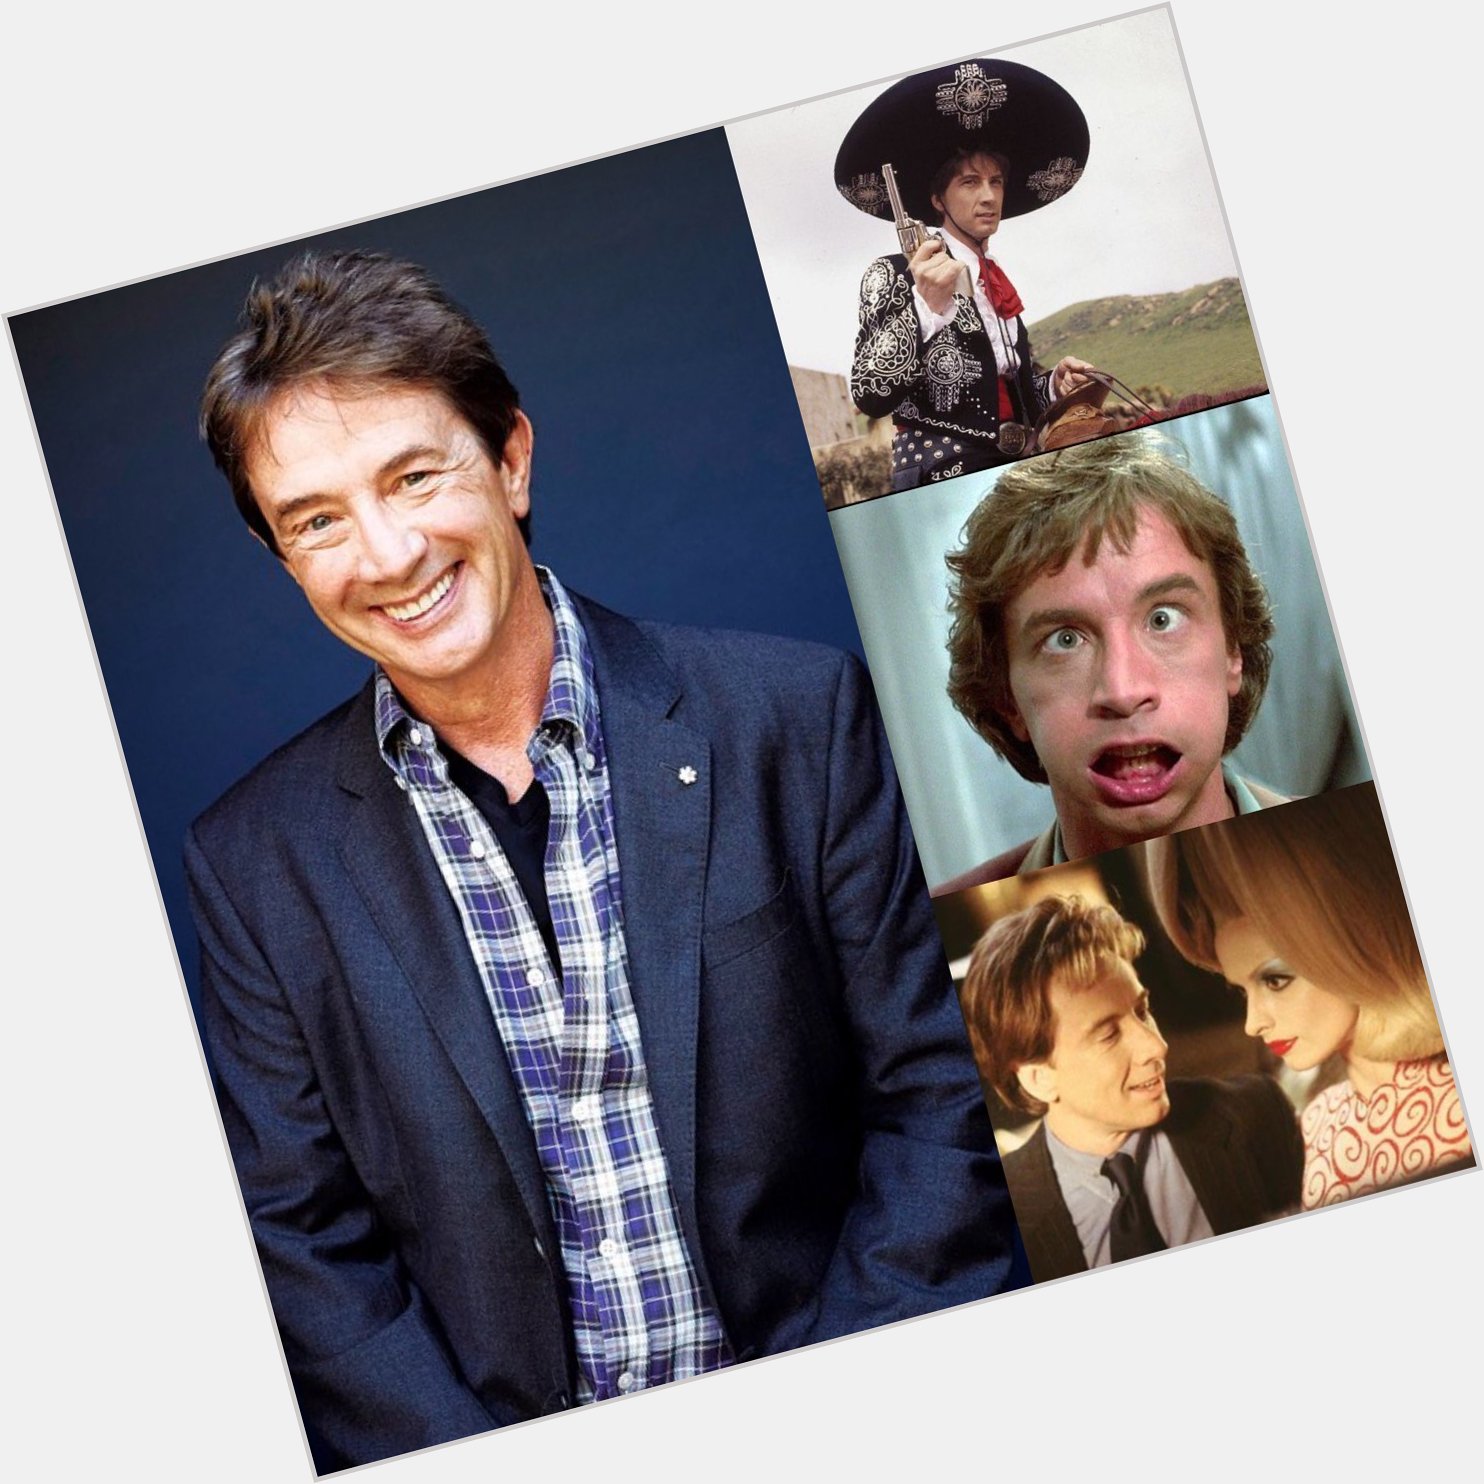 Happy birthday to Canadian-American actor, comedian, singer, and writer Martin Short, born March 26, 1950. 